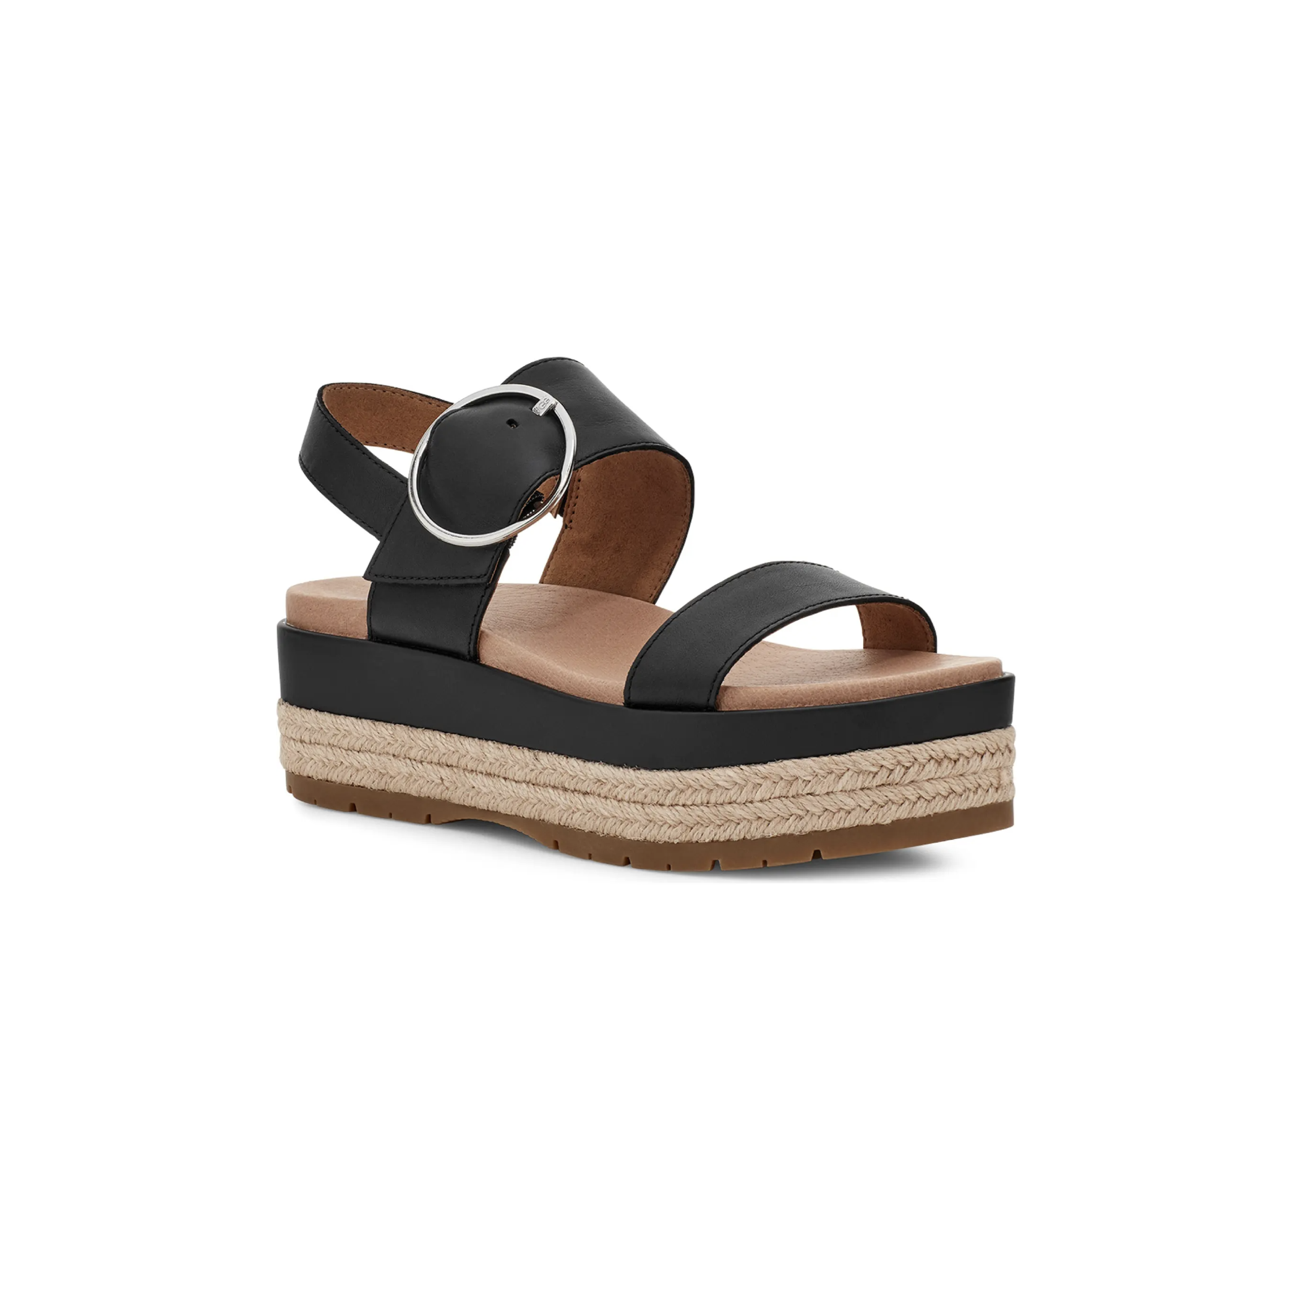 most comfortable and stylish sandals